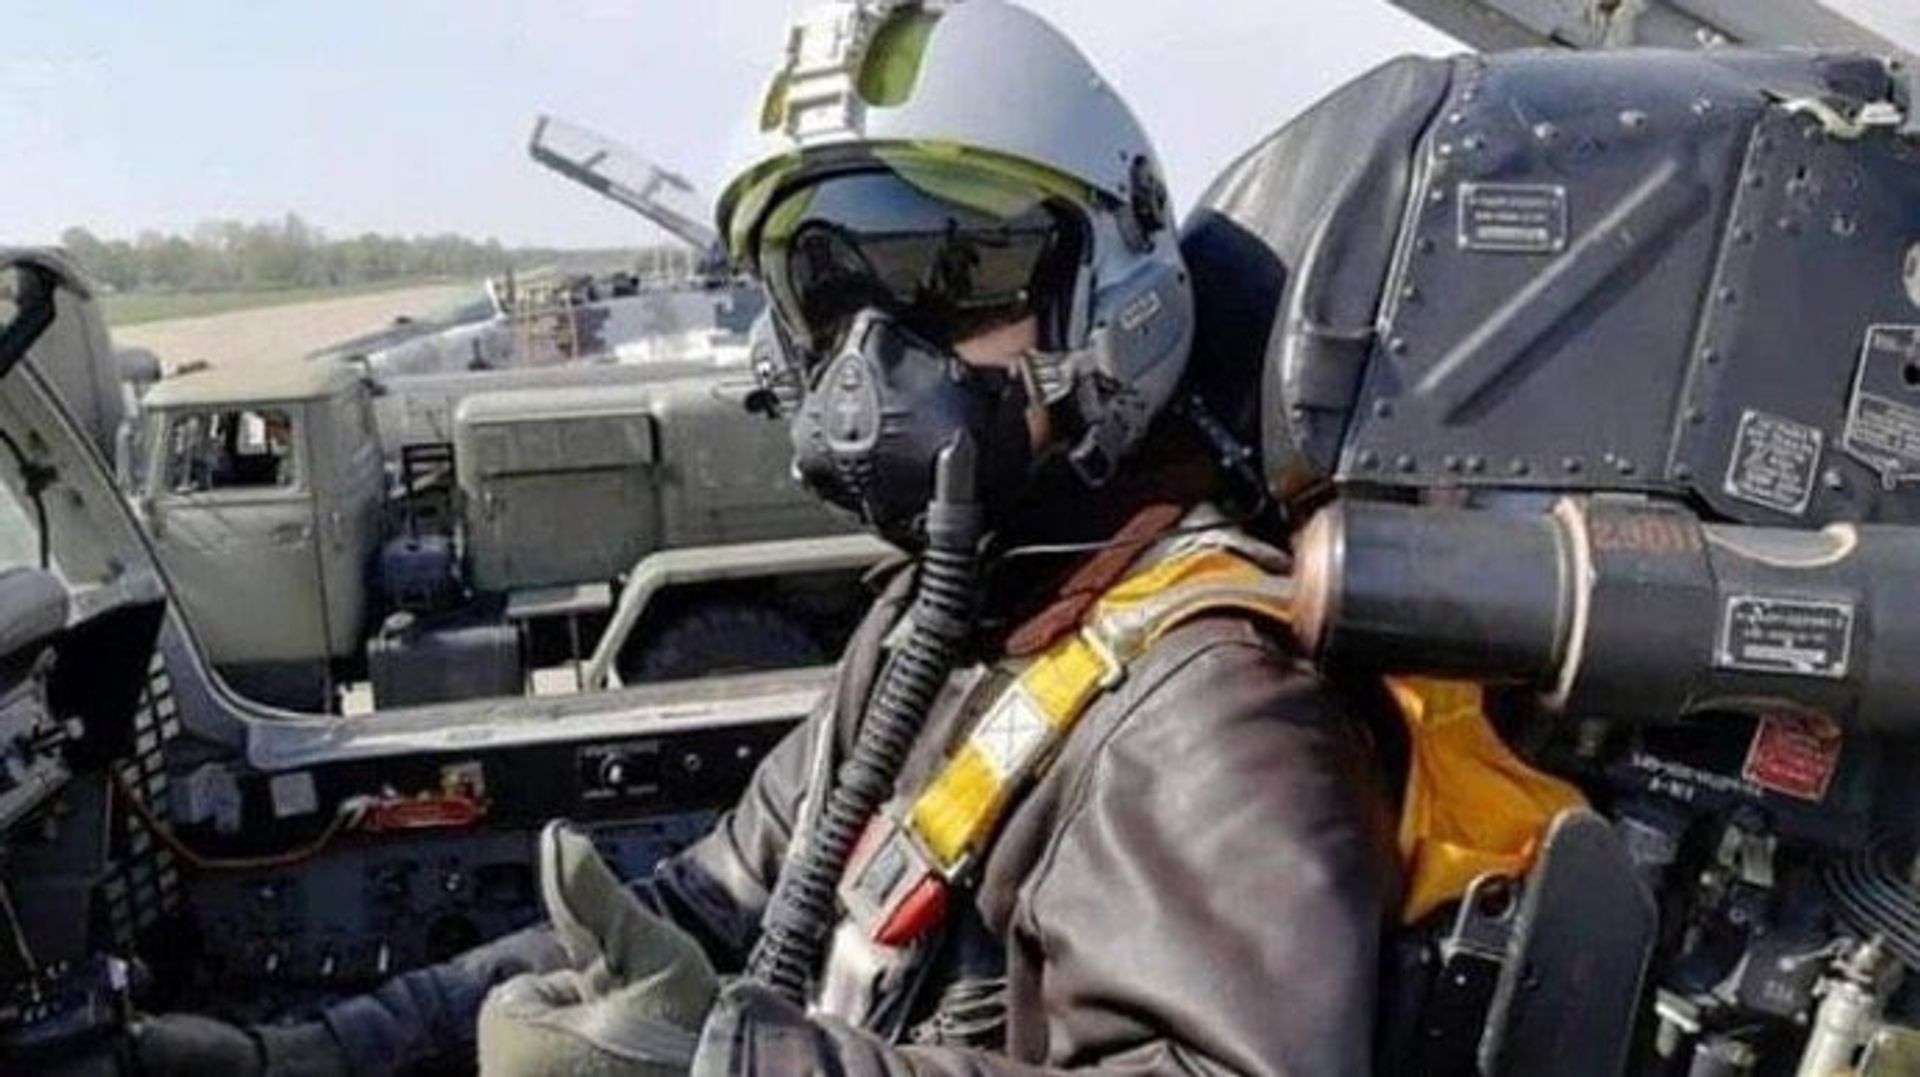 Image widely shared on social media, including by the former Ukrainian president, claiming to be the Ghost of Kyiv, an ace fighter pilot who downed six Russian aircraft in 30 hours. 